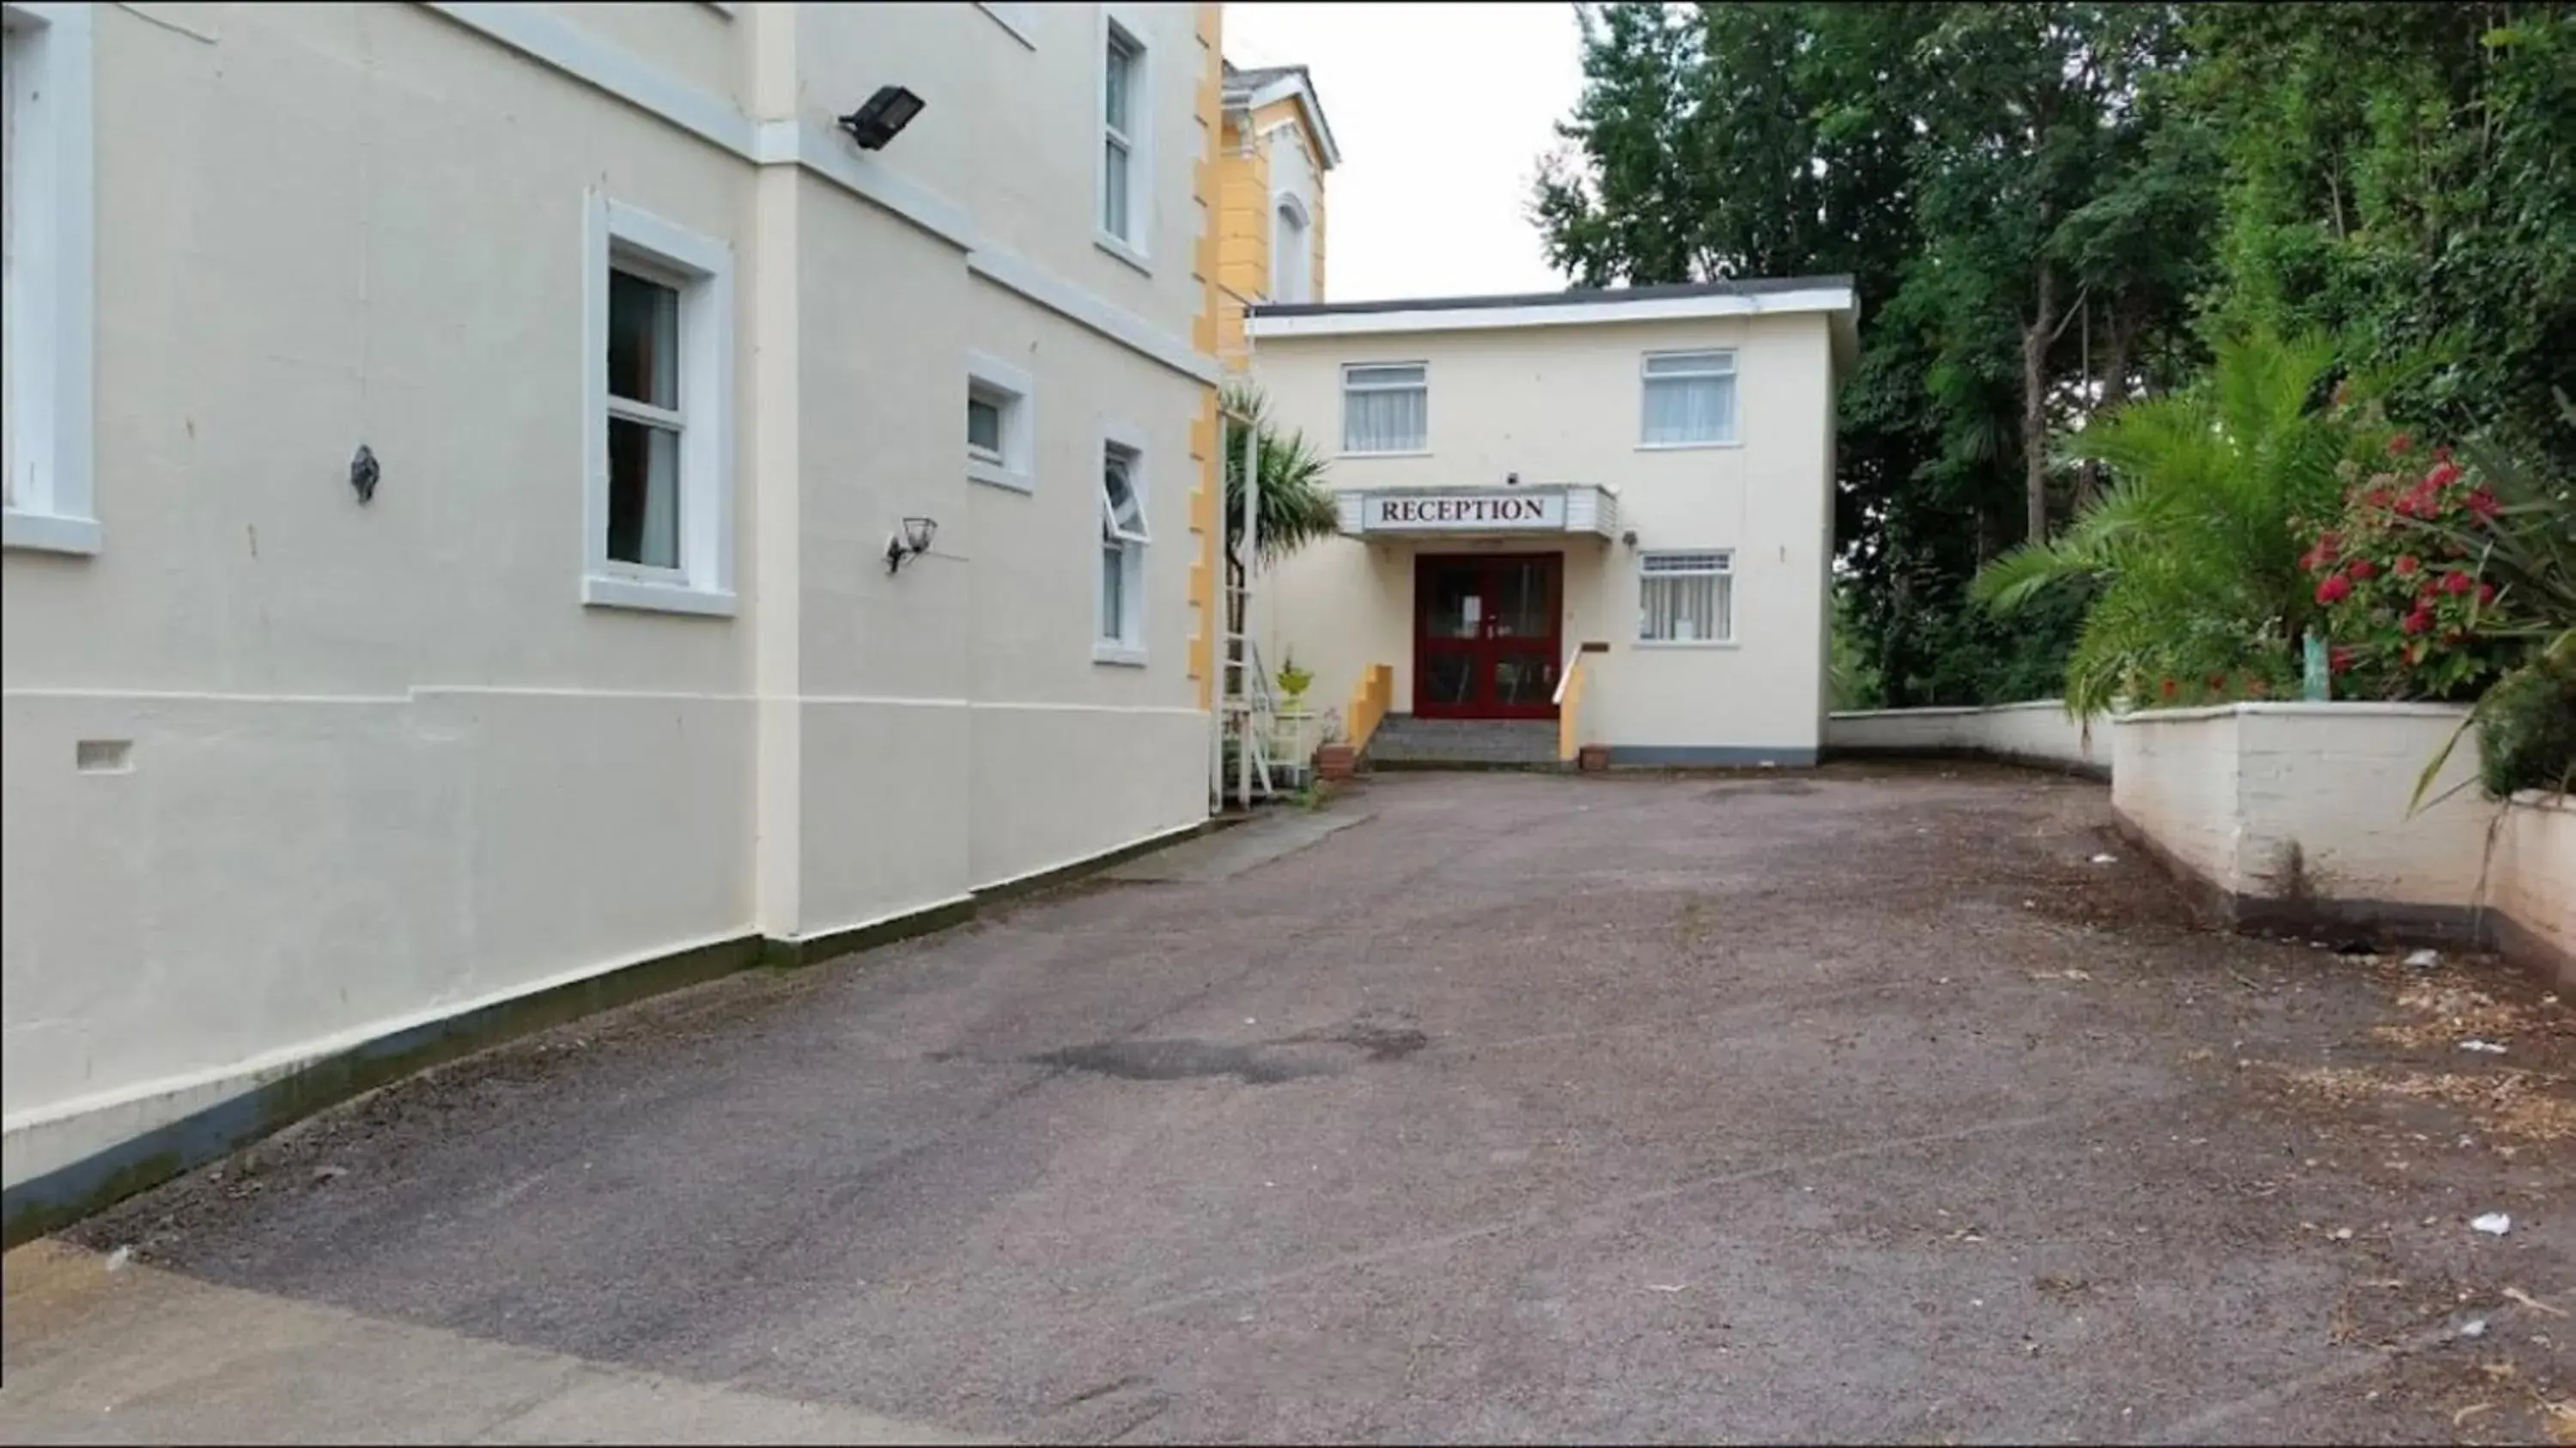 Facade/entrance, Property Building in Inglewood Palm Hotel, Abbey Sands Torquay